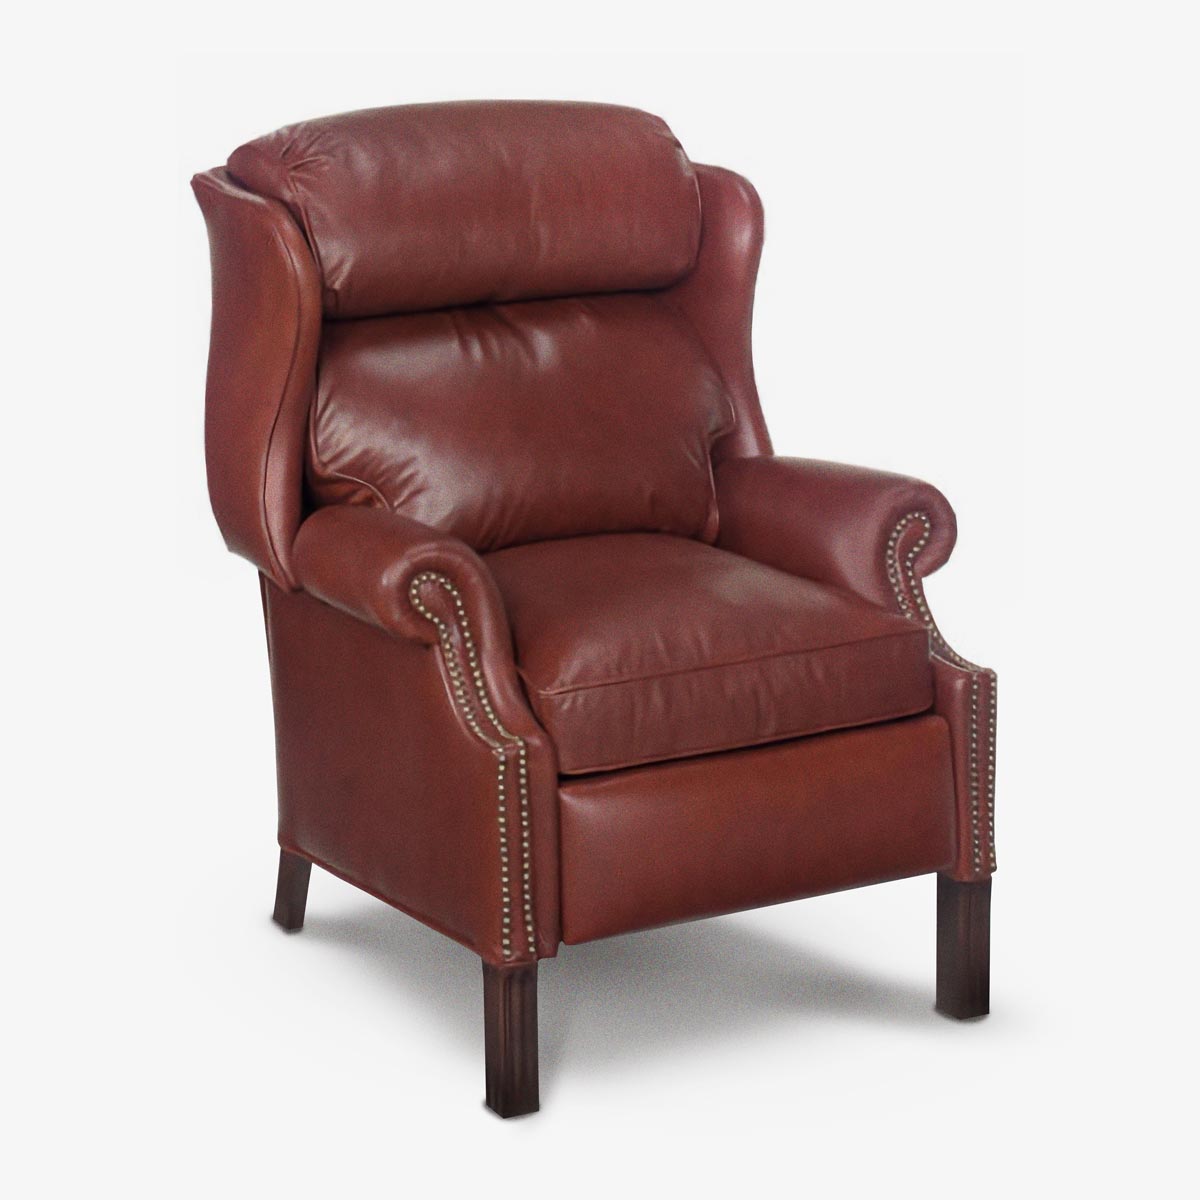 The Harry: American Made Recliner with Straight Legs